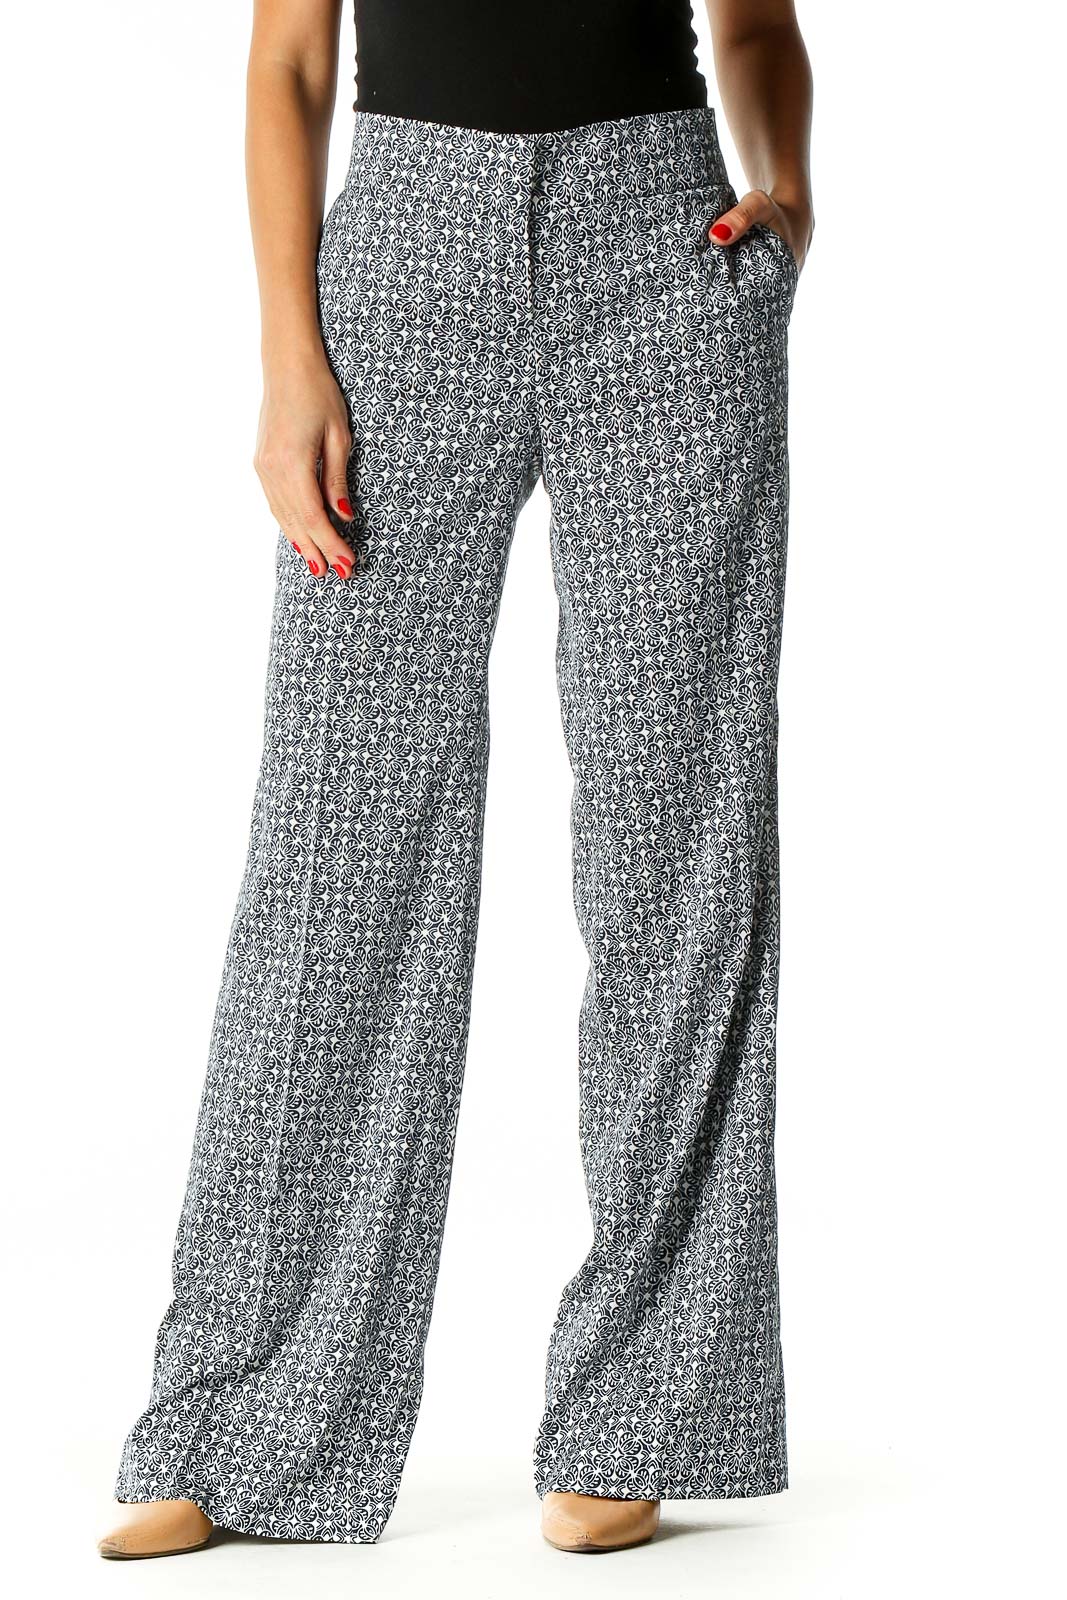 Gray Printed All Day Wear Trousers Front